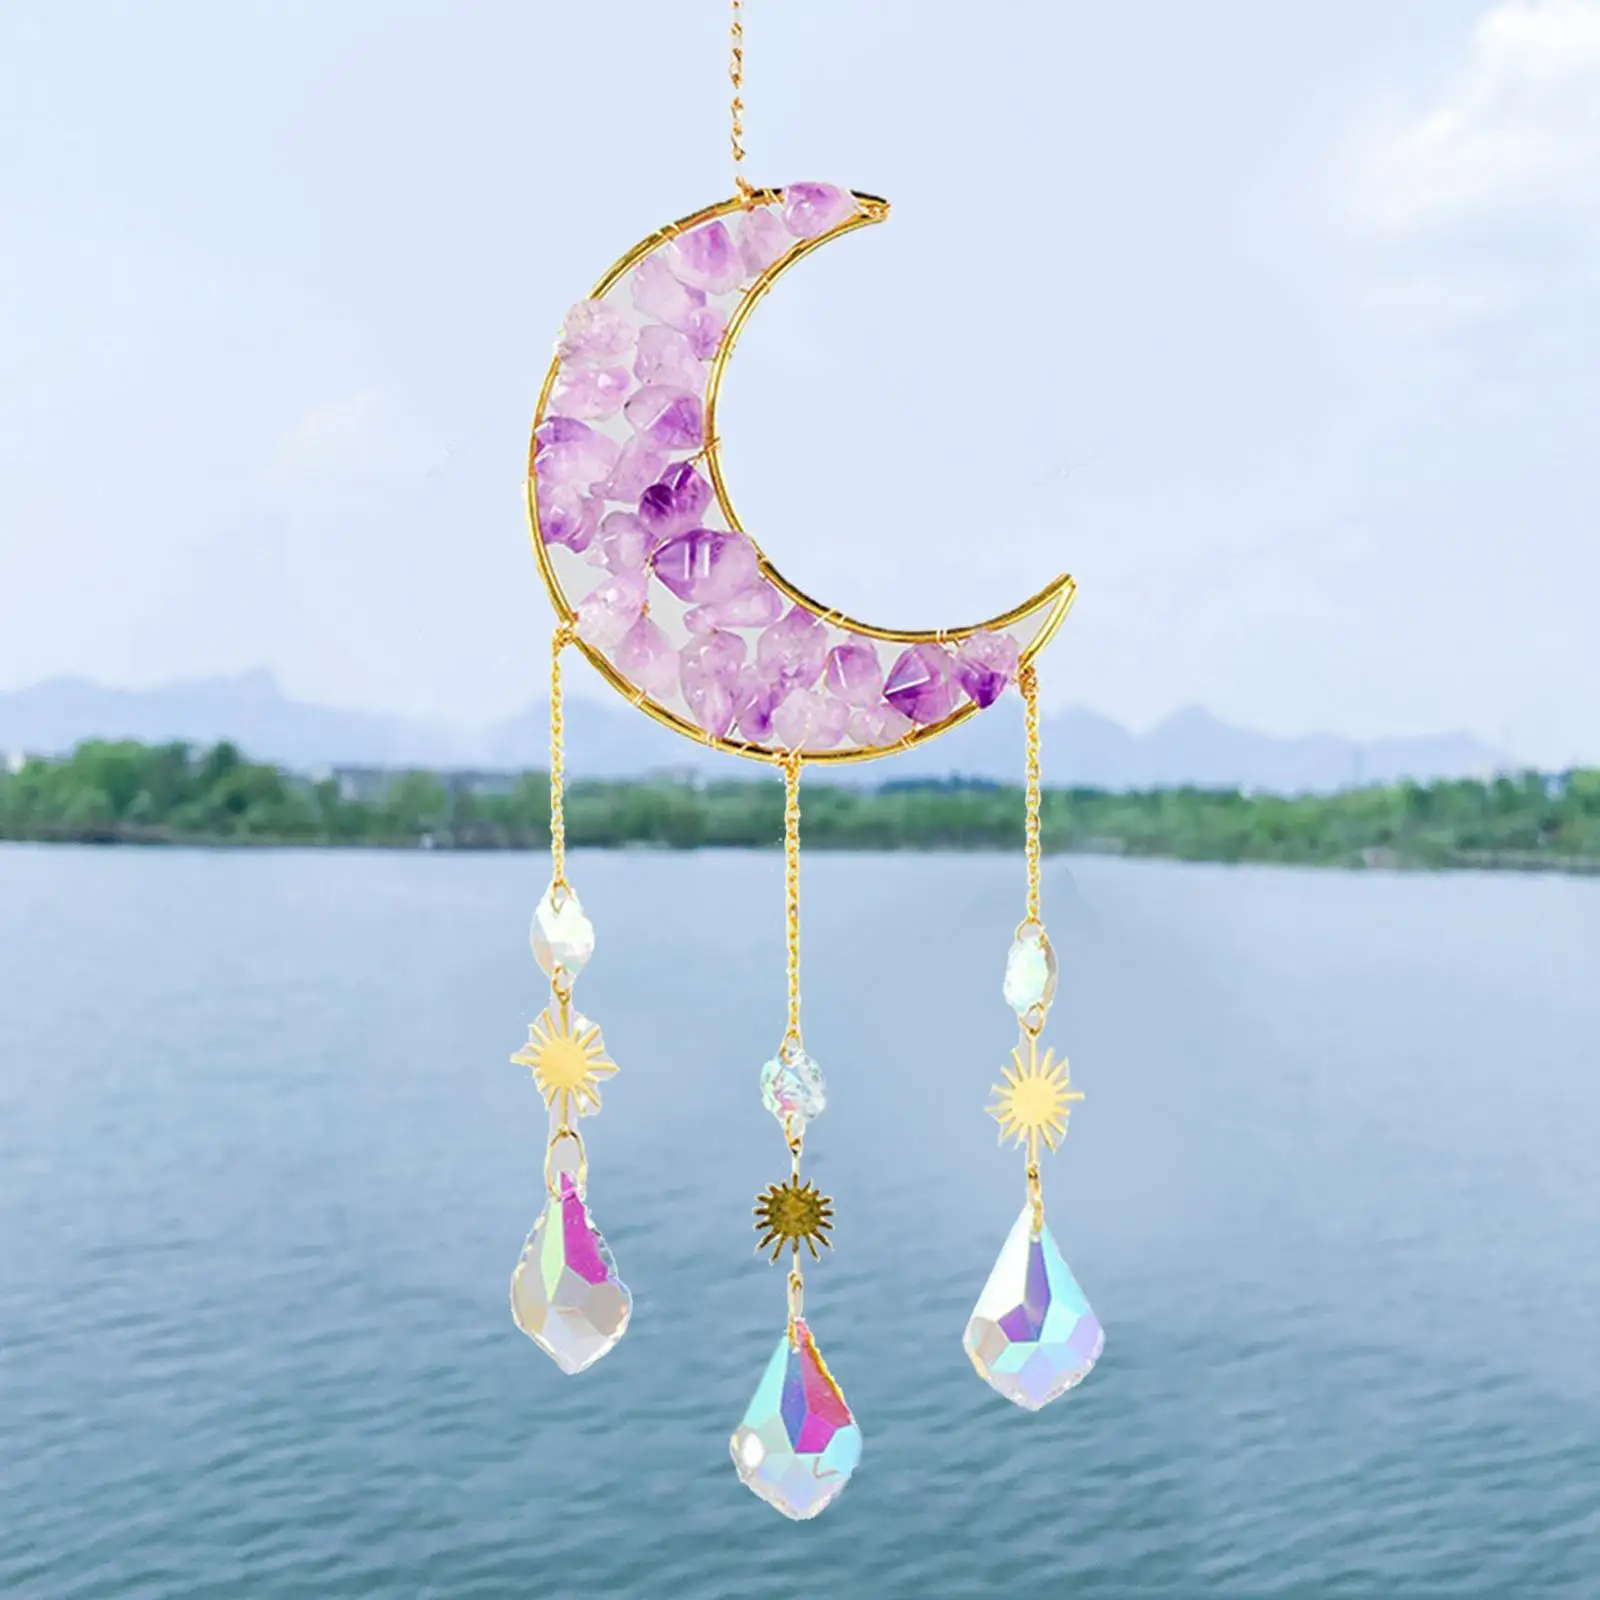 Crystal Wind Chime Moon Pendant Rainbow Maker Hanging Ornament Feng Shui for Home Window Office Decoration Gift